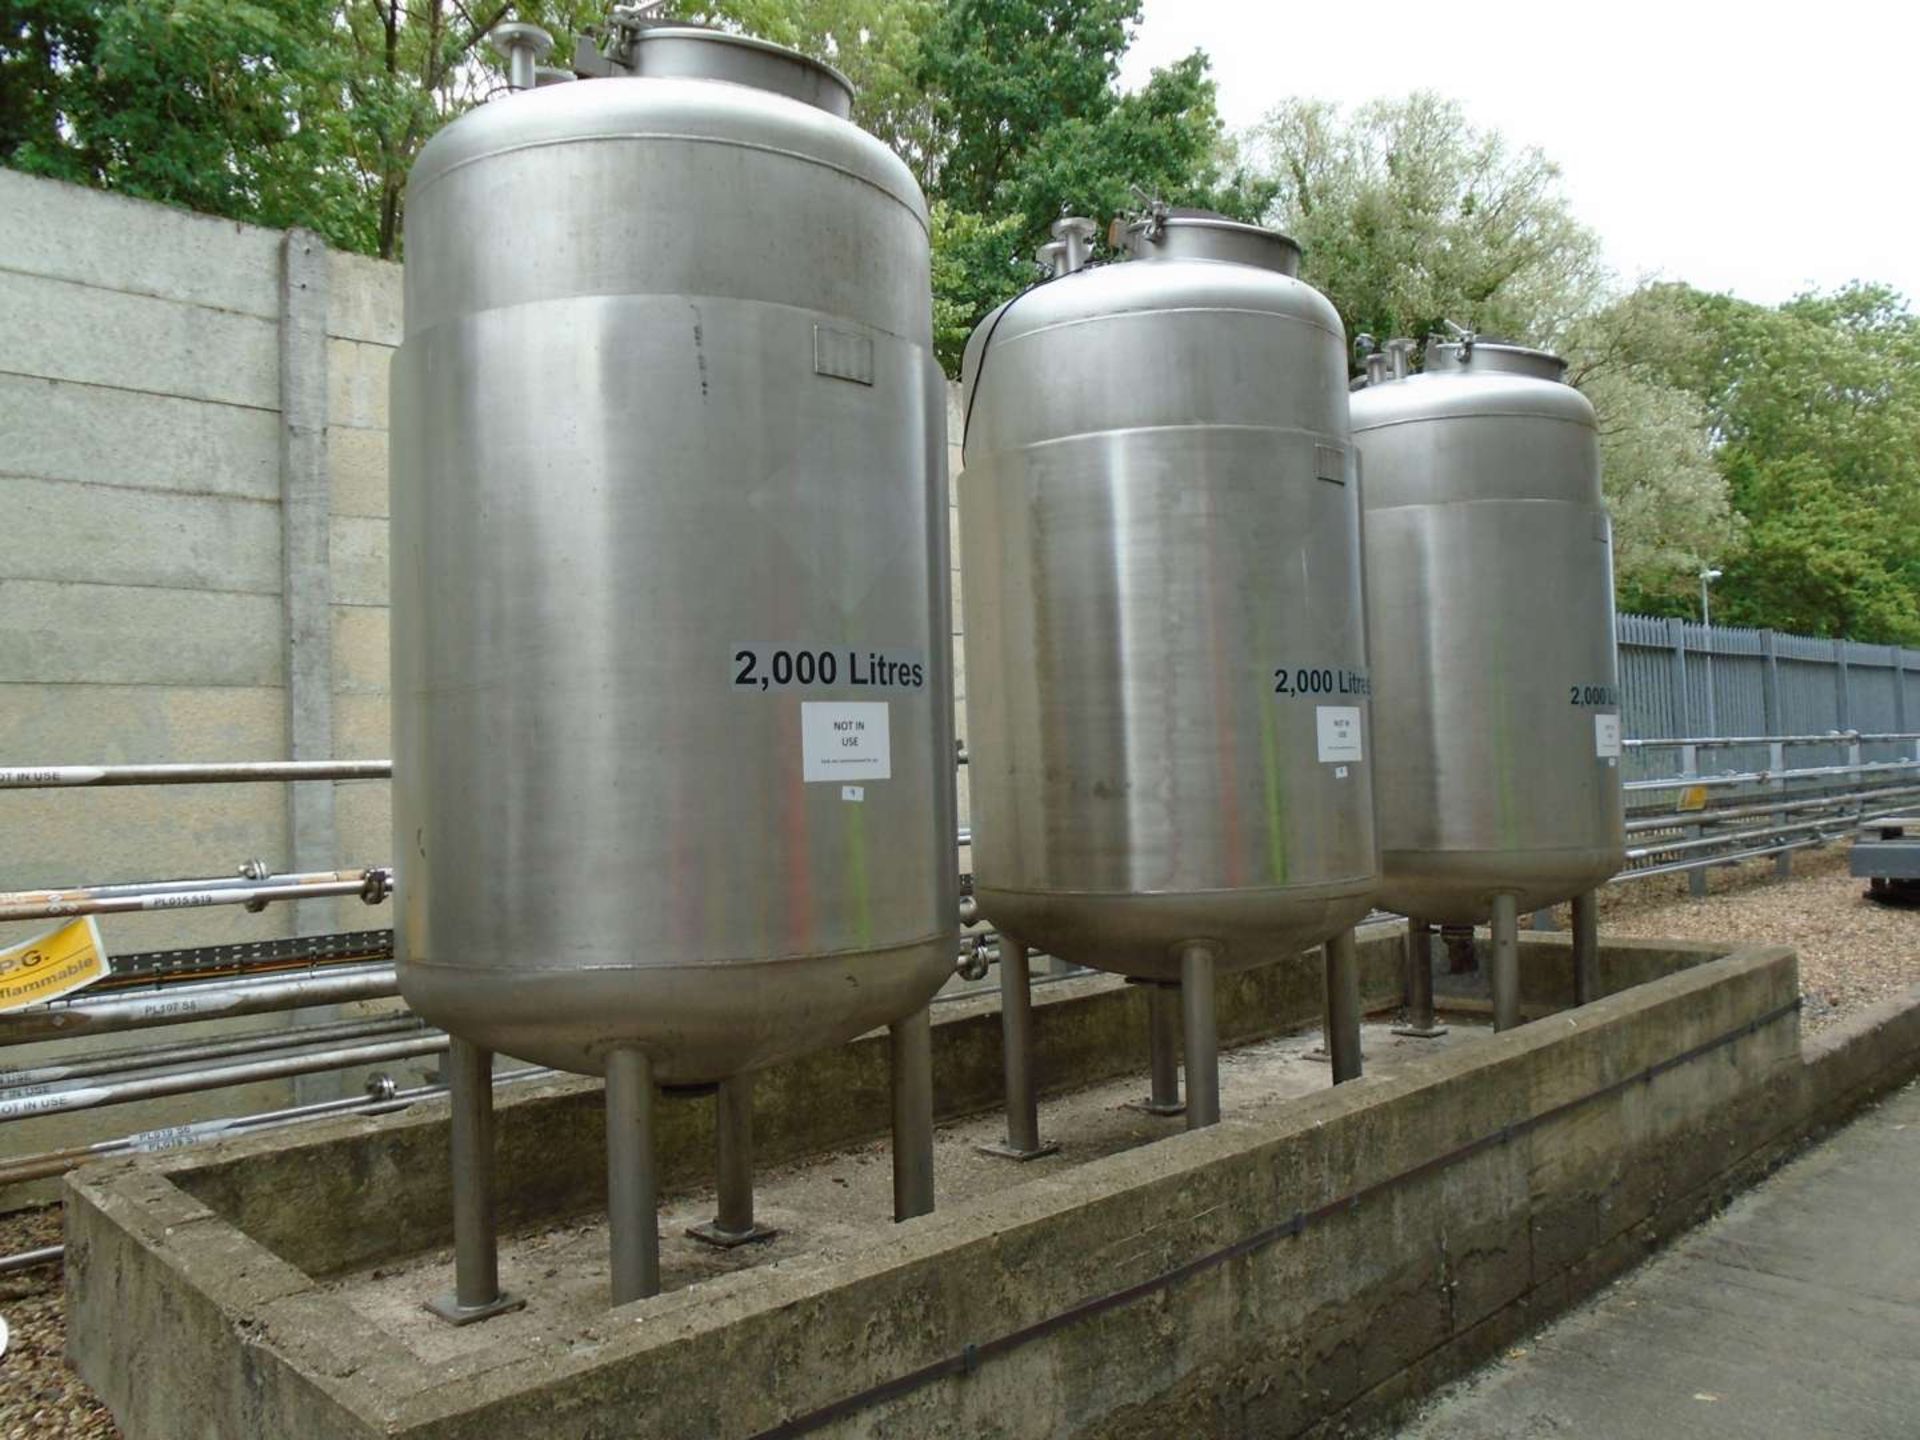 Used Fairfield Dalton (appx 1,900 litre) stainless steel vertical jacketed vessel.